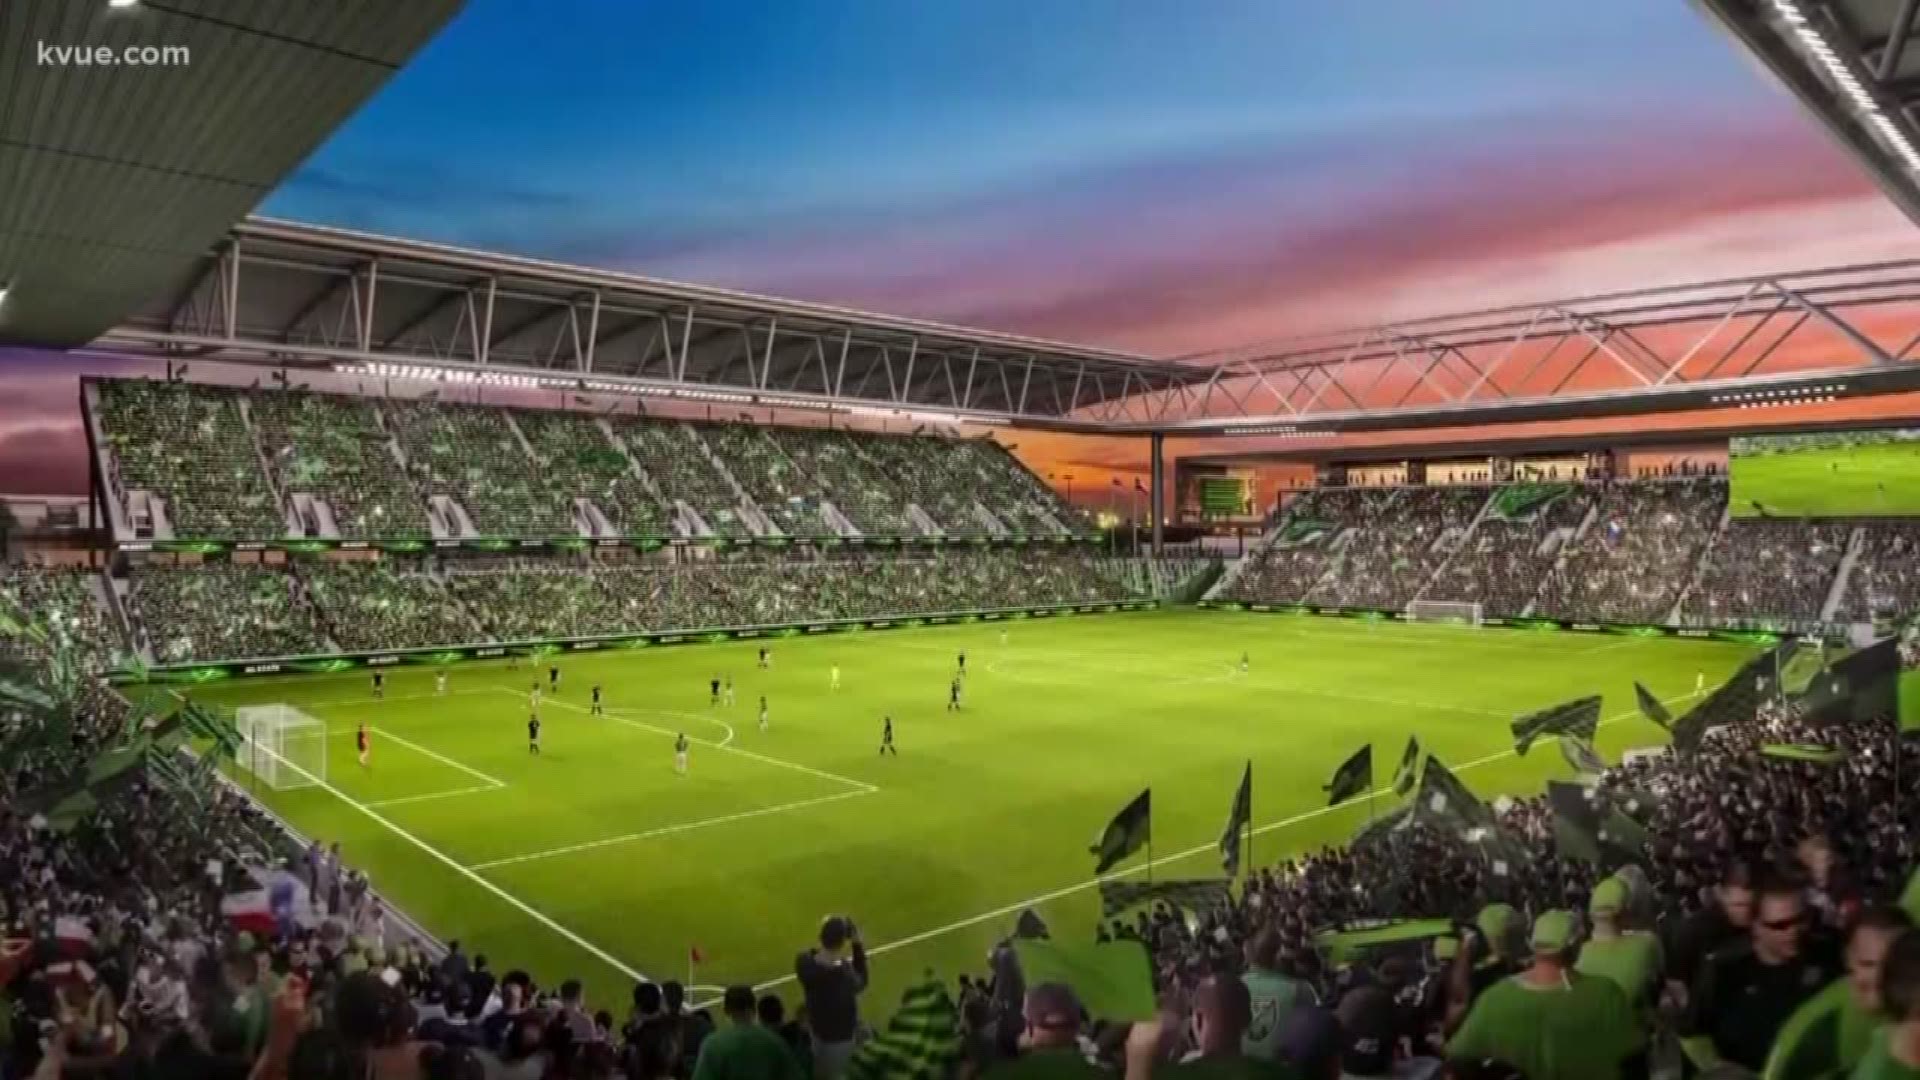 THE City Council gave the green light to Precourt Sports Ventures to build a stadium at McKalla Place -- the 24-acre property near the Domain.